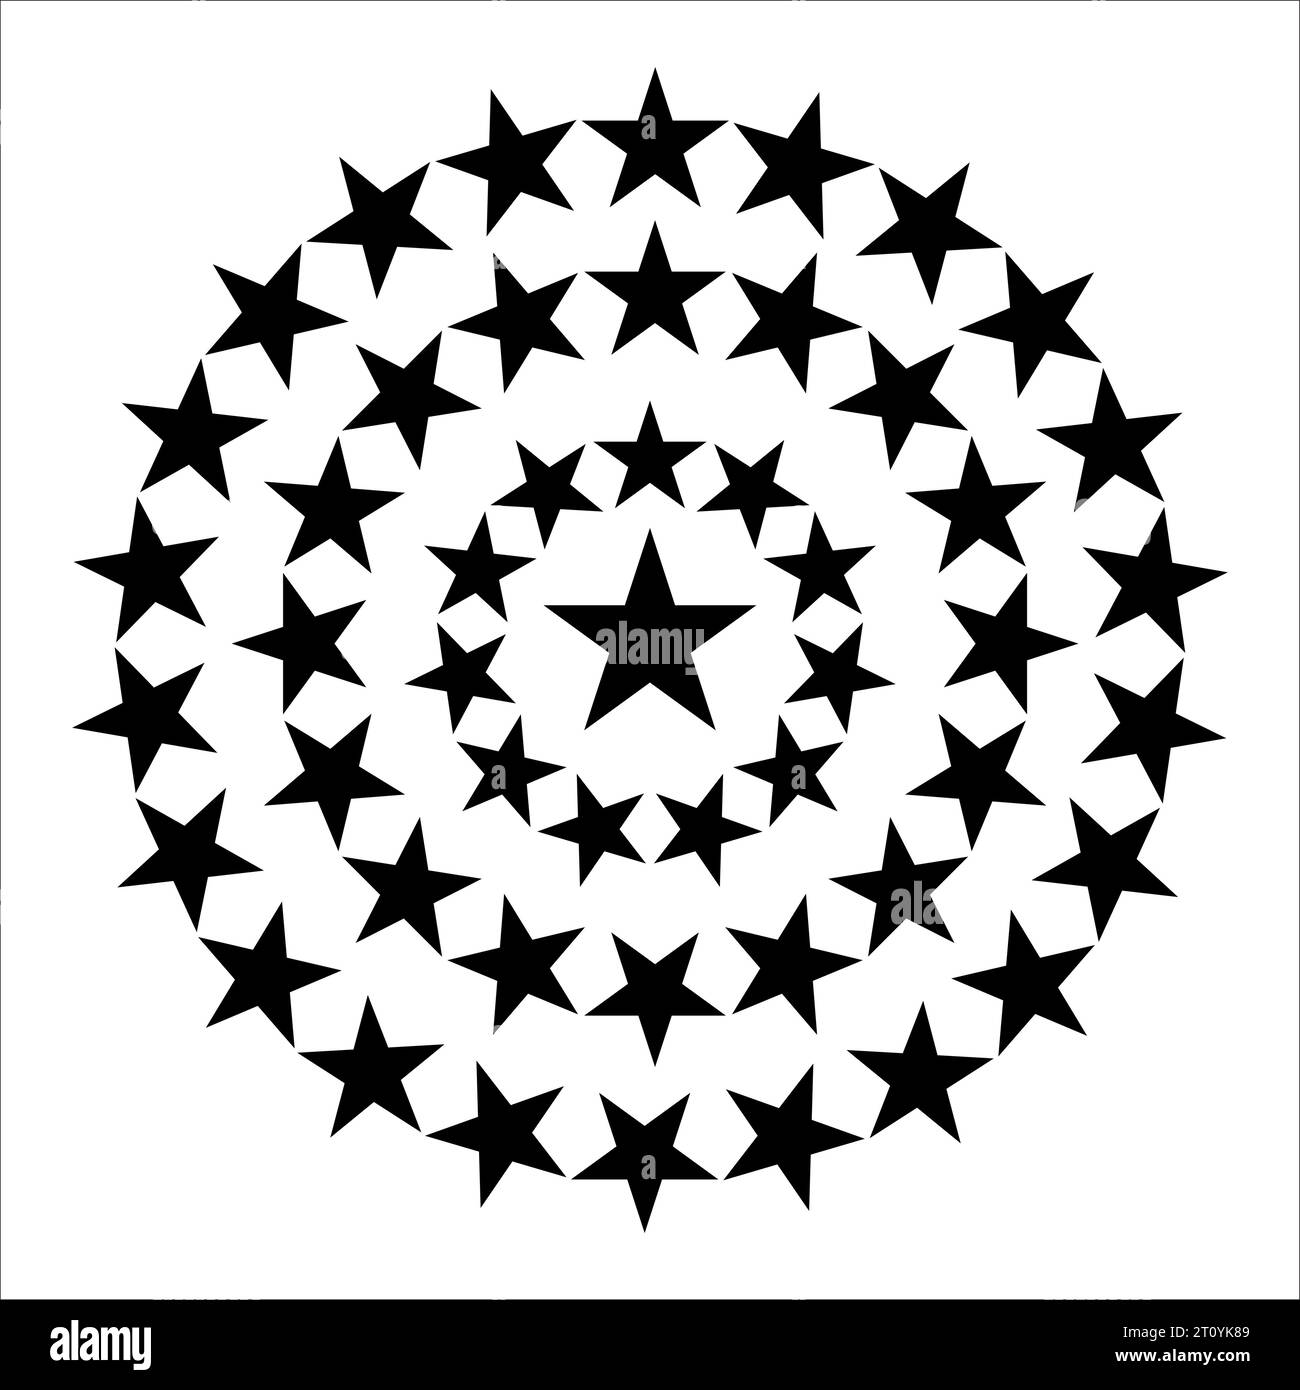 Star circle. Round frames with stars for badge, emblem, and seal. Circular rating icons with five-pointed silhouette star, award vector sign set Stock Vector